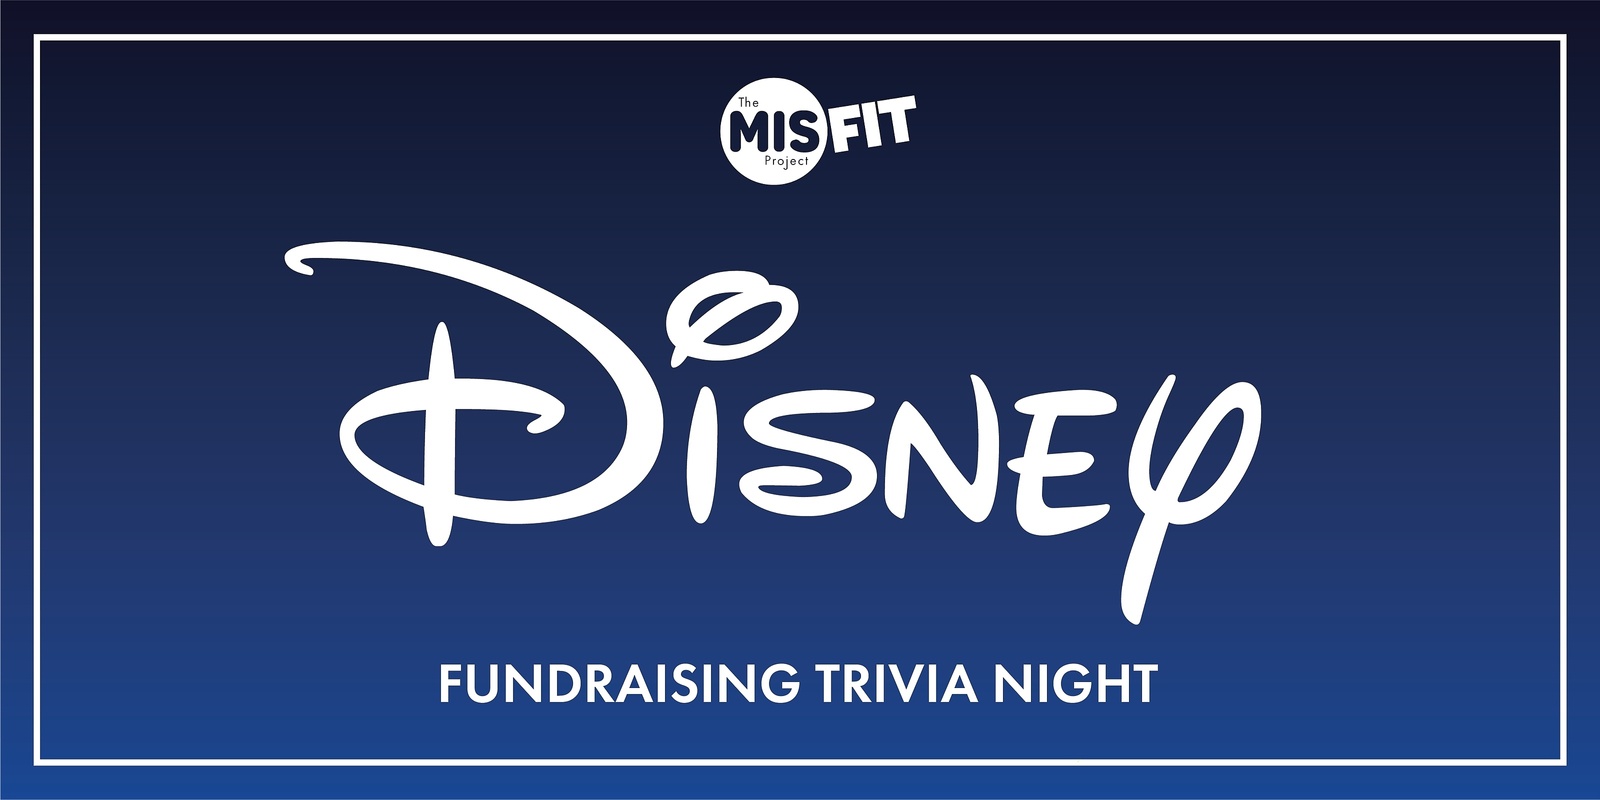 Banner image for The MISFIT Project - Fundraising Trivia night 